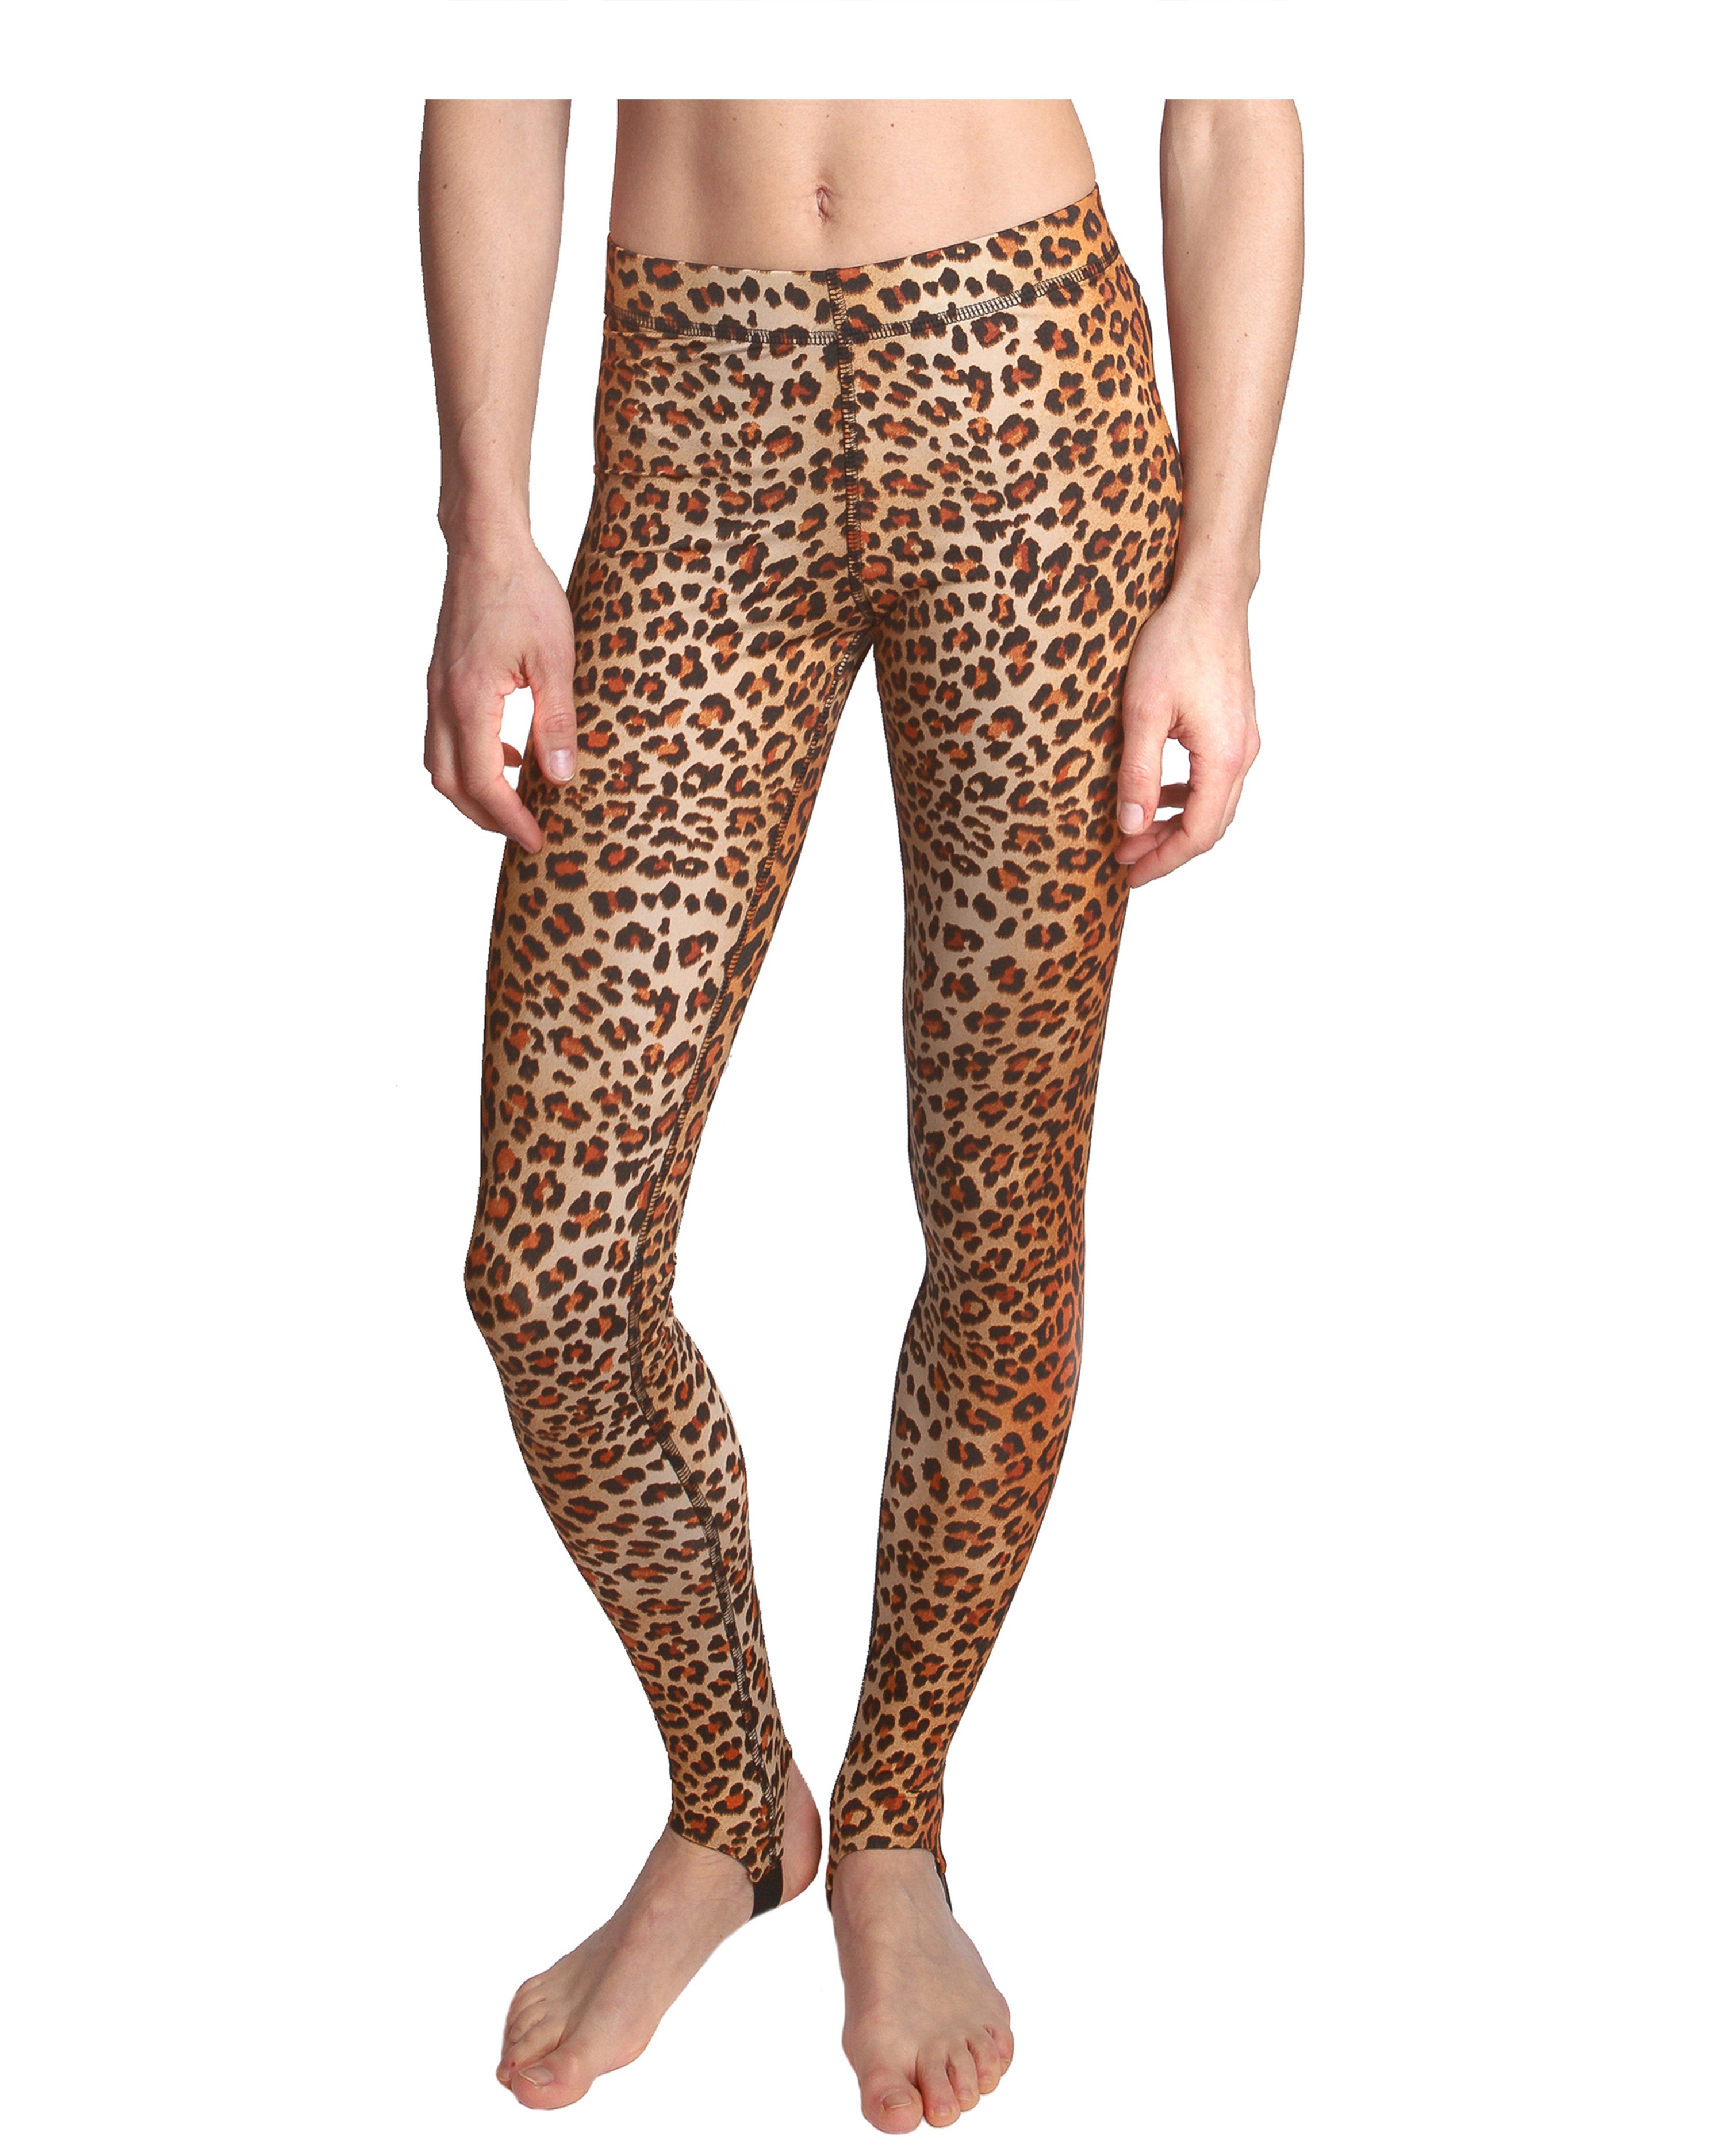 Leopard print gym leggings - Printed tights for workouts like yoga, running,  cycling or swimming - Premium quality Italian fabric - By LPRD